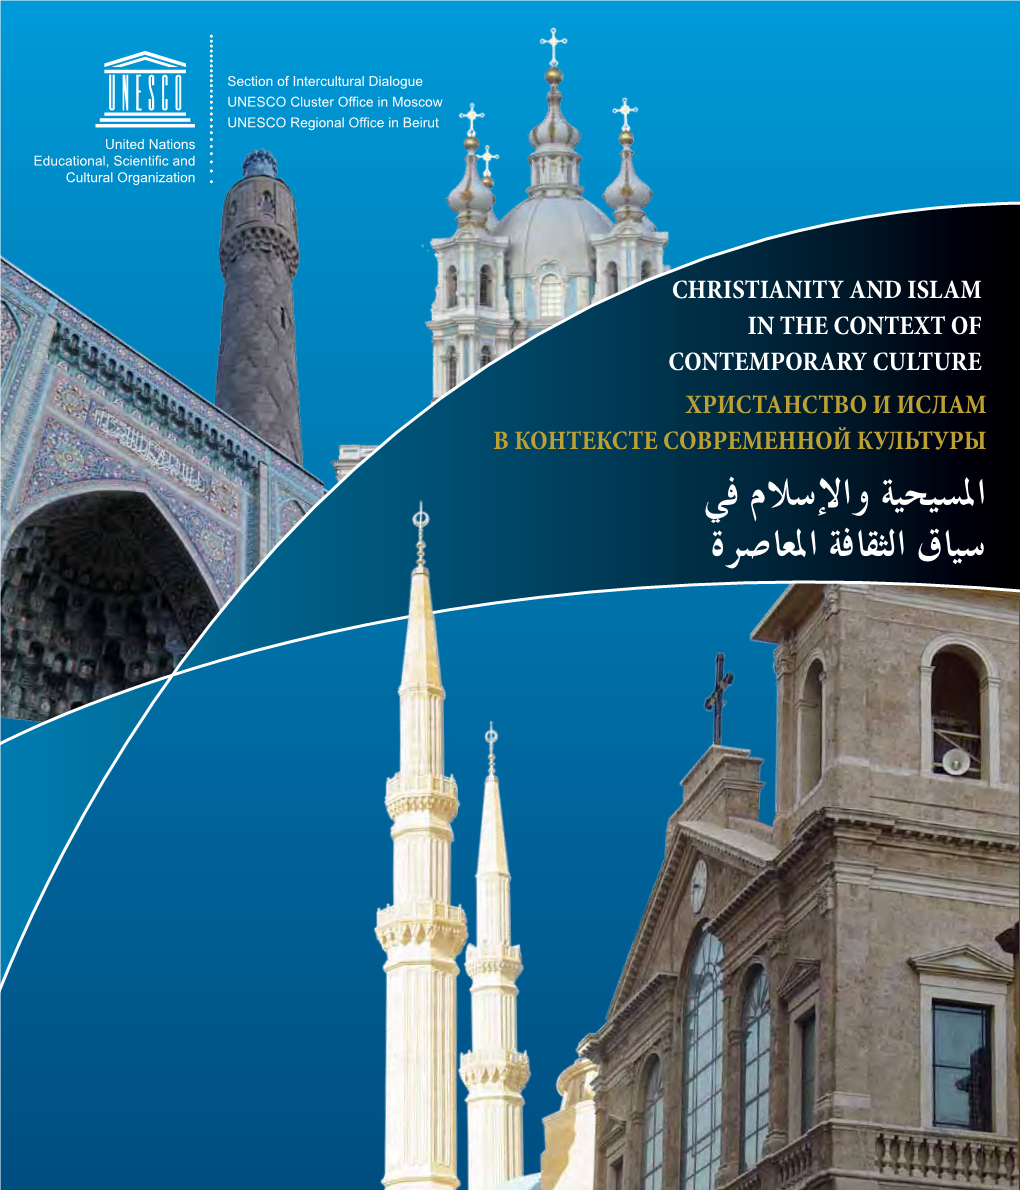 Christianity and Islam in the Context of Contemporary Culture: Perspectives of Interfaith Dialogue from Russia and the Middle East / Ed